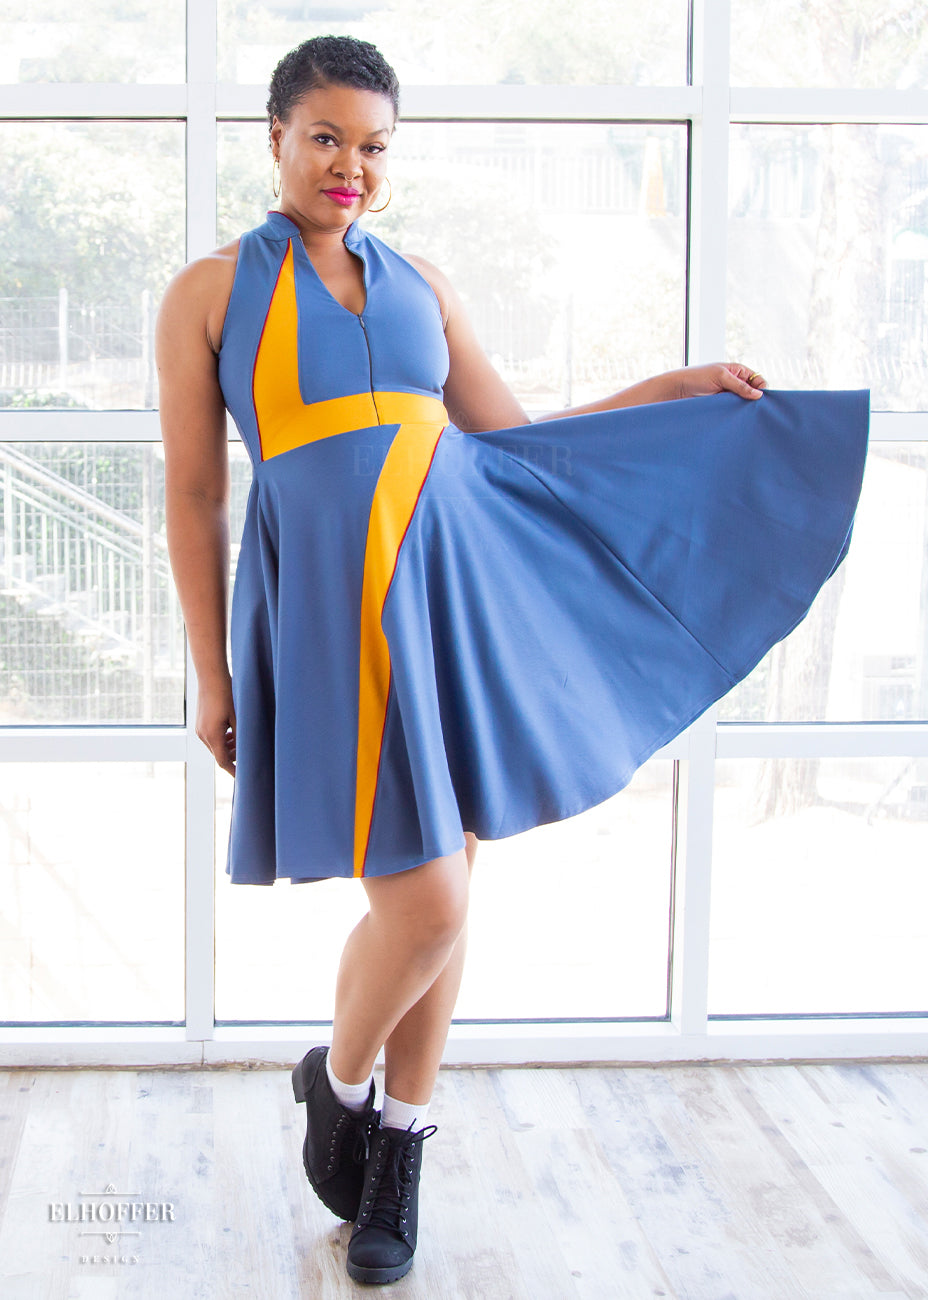 Desiree, a size large medium dark skinned model with very short dark hair, holds out the full skirt of a high-necked sleeveless blue dress. The dress is piped in crimson and has a yellow lightening bolt emblazoned over the front of it. There is a zip down the middle down to the waist that she has unzipped to show a bit of décolletage.